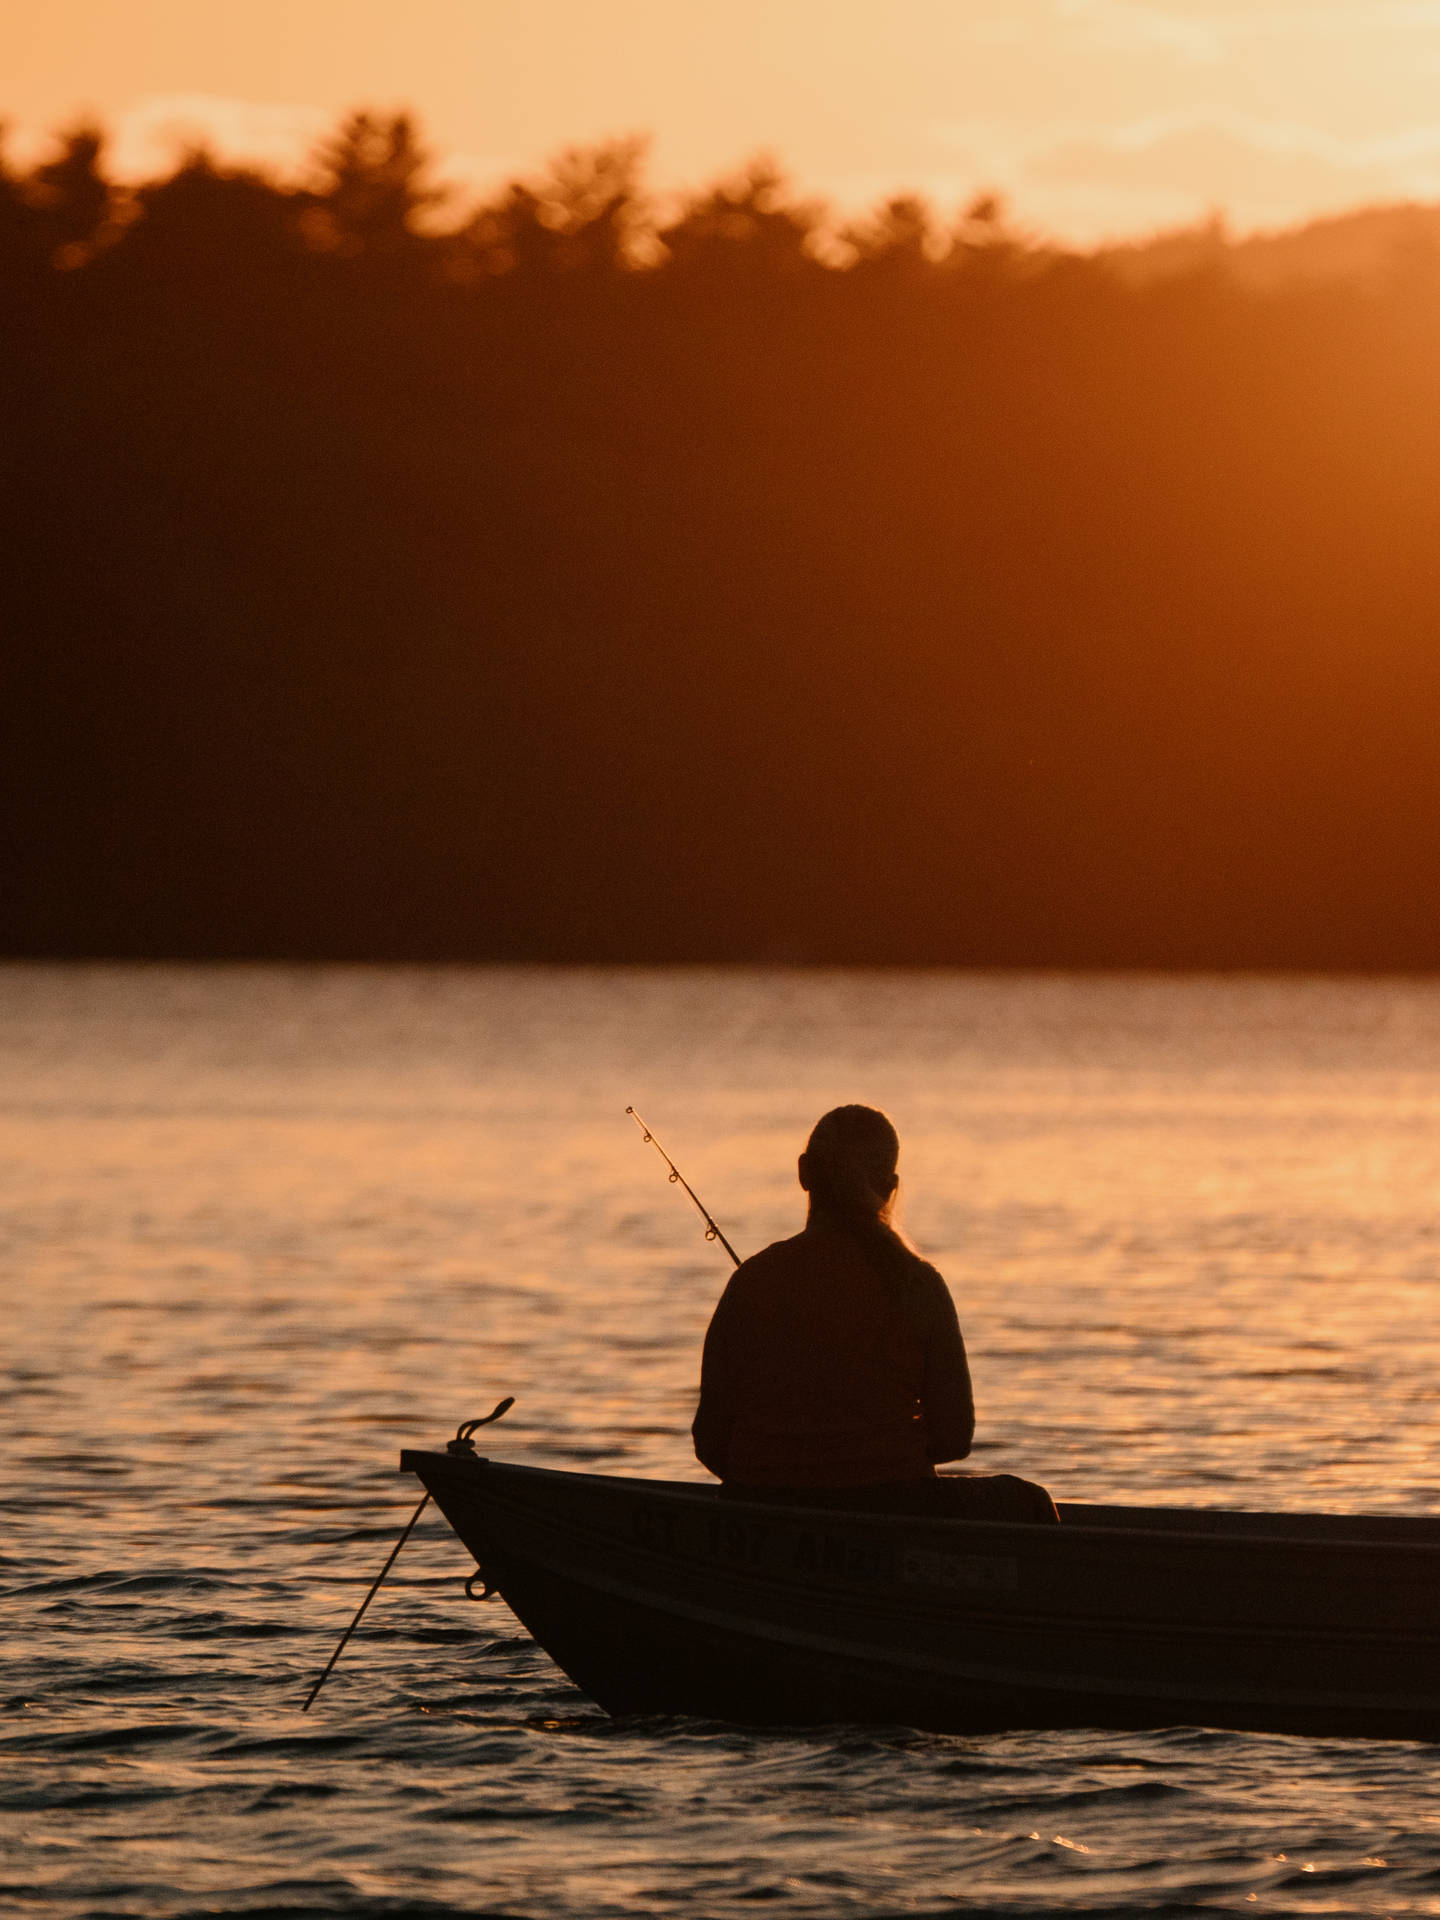 An Early Morning Angler Enjoying The Tranquility Of A Tranquil Fishing Boat. Background